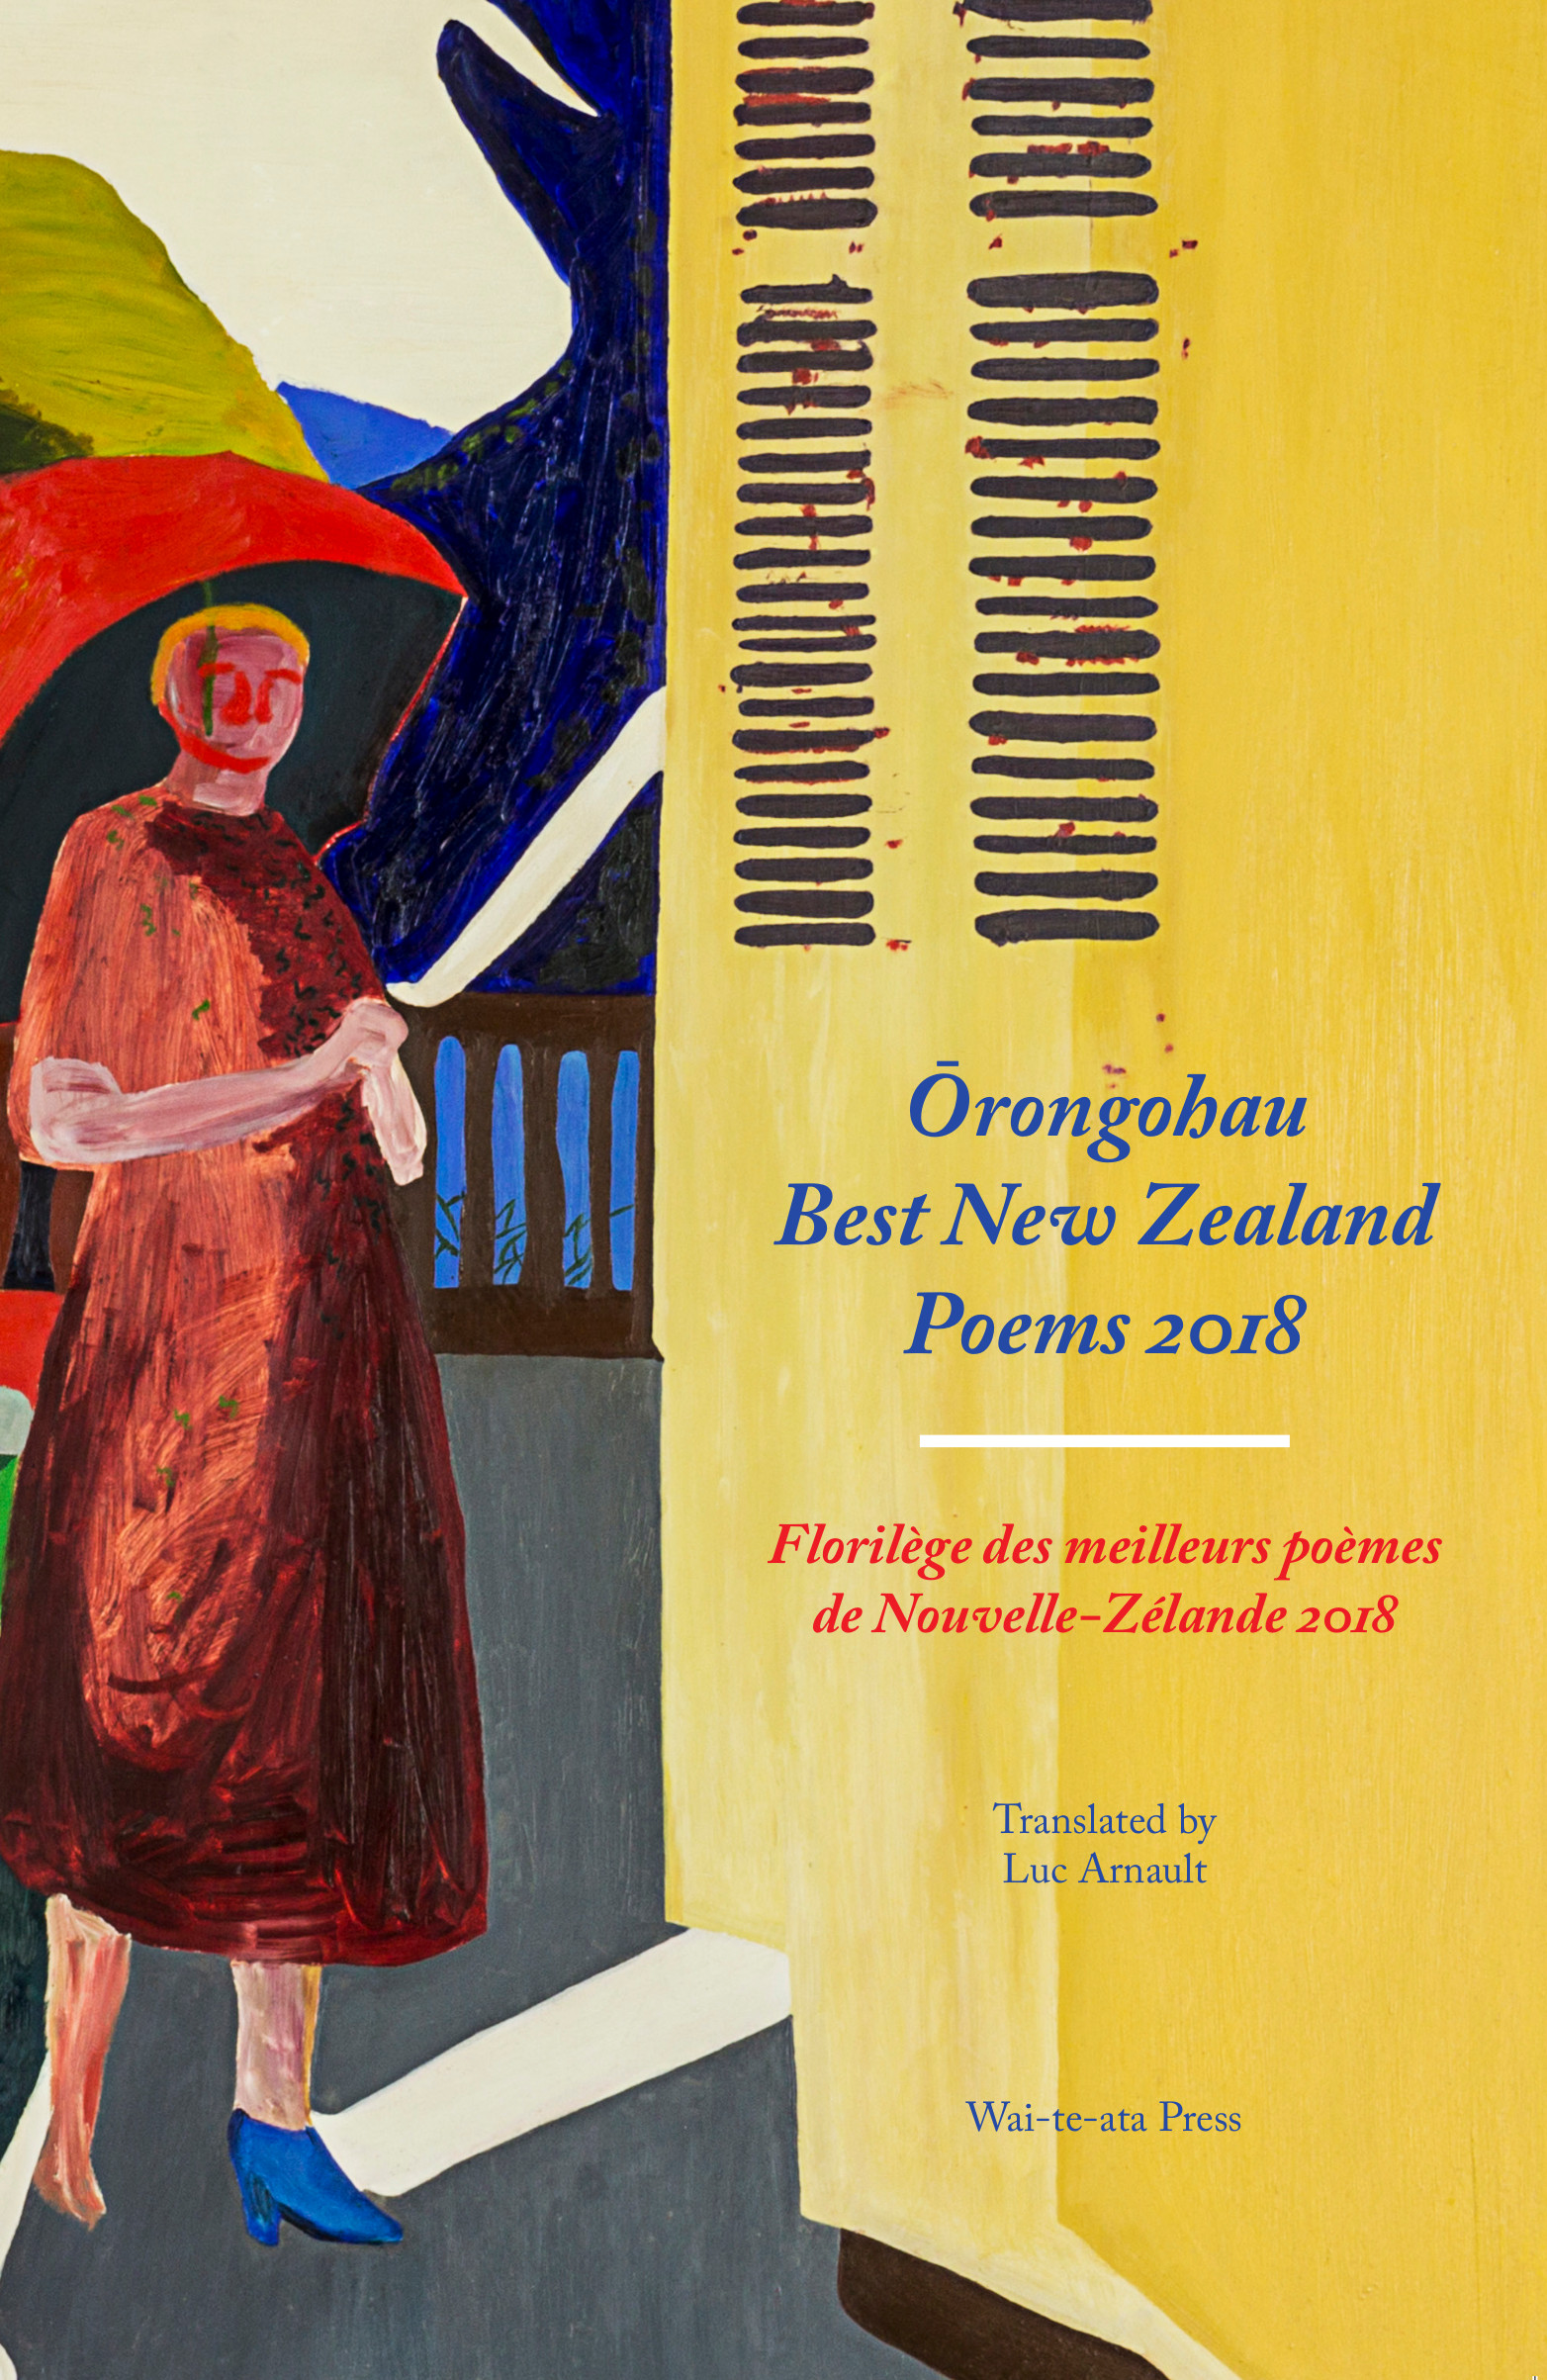 Cover of French bilingual edition of Best NZ Poems 2018, featuring a painting by Jeffrey Harris